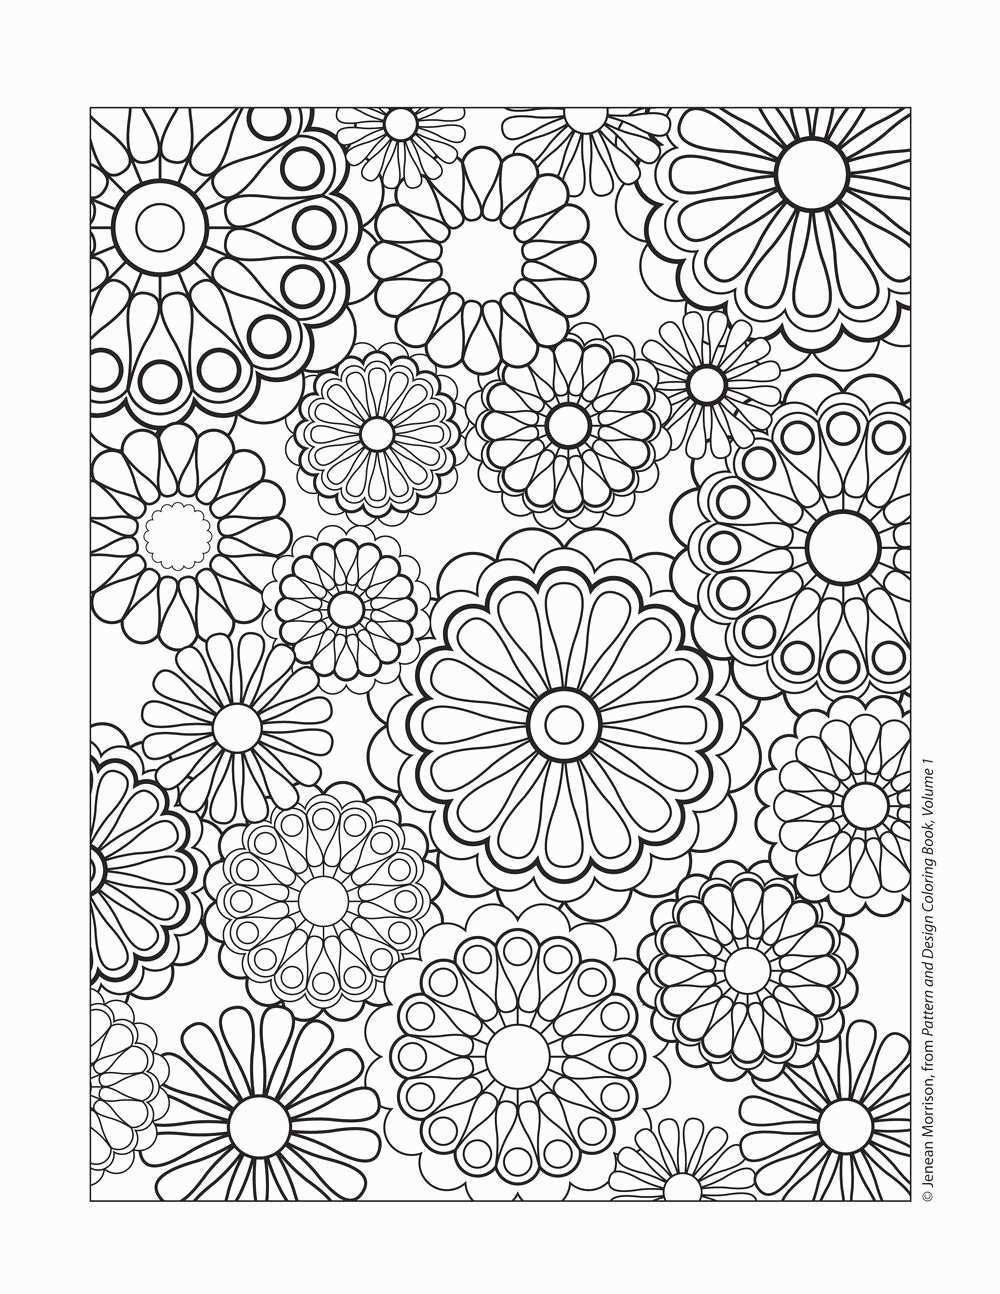 22 Fantastic Vase Of Flowers Art 2024 free download vase of flowers art of colored pages fresh cool vases flower vase coloring page pages with colored pages fresh cool vases flower vase coloring page pages flowers in a top i 0d